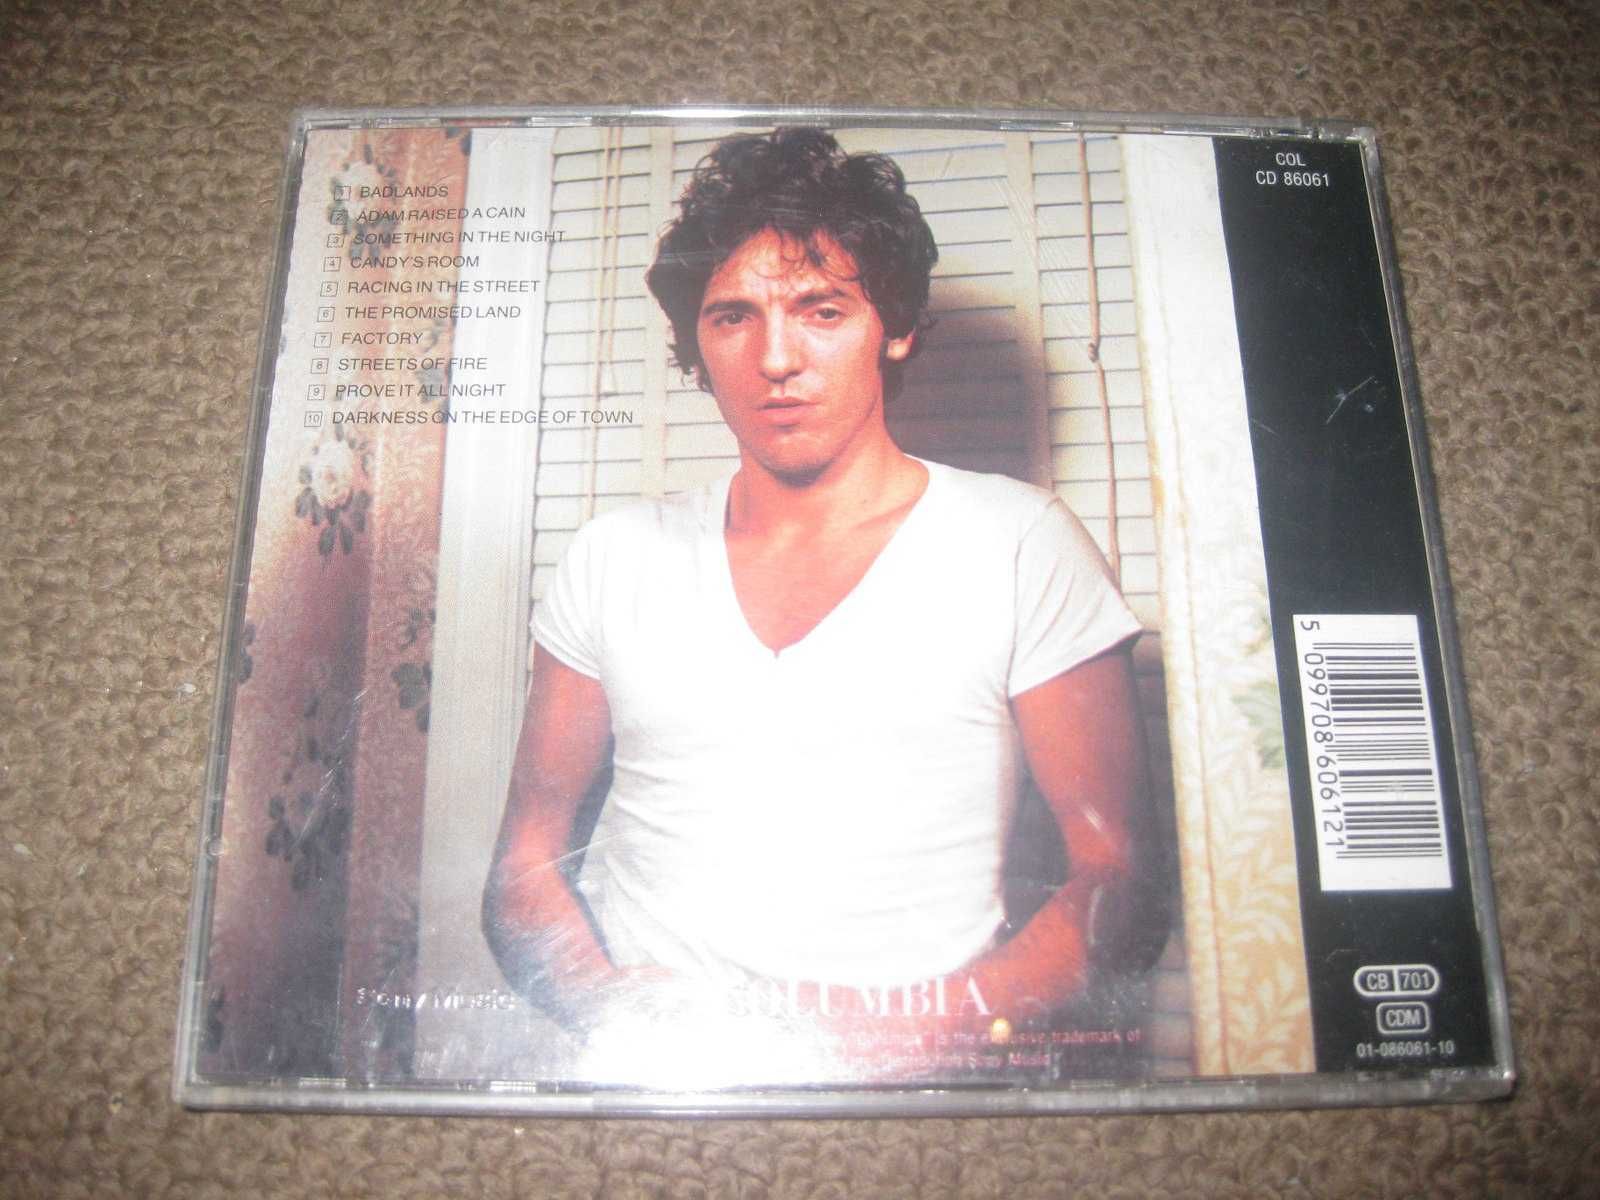 CD do Bruce Springsteen "Darkness on the Edge of Town" Portes Grátis!